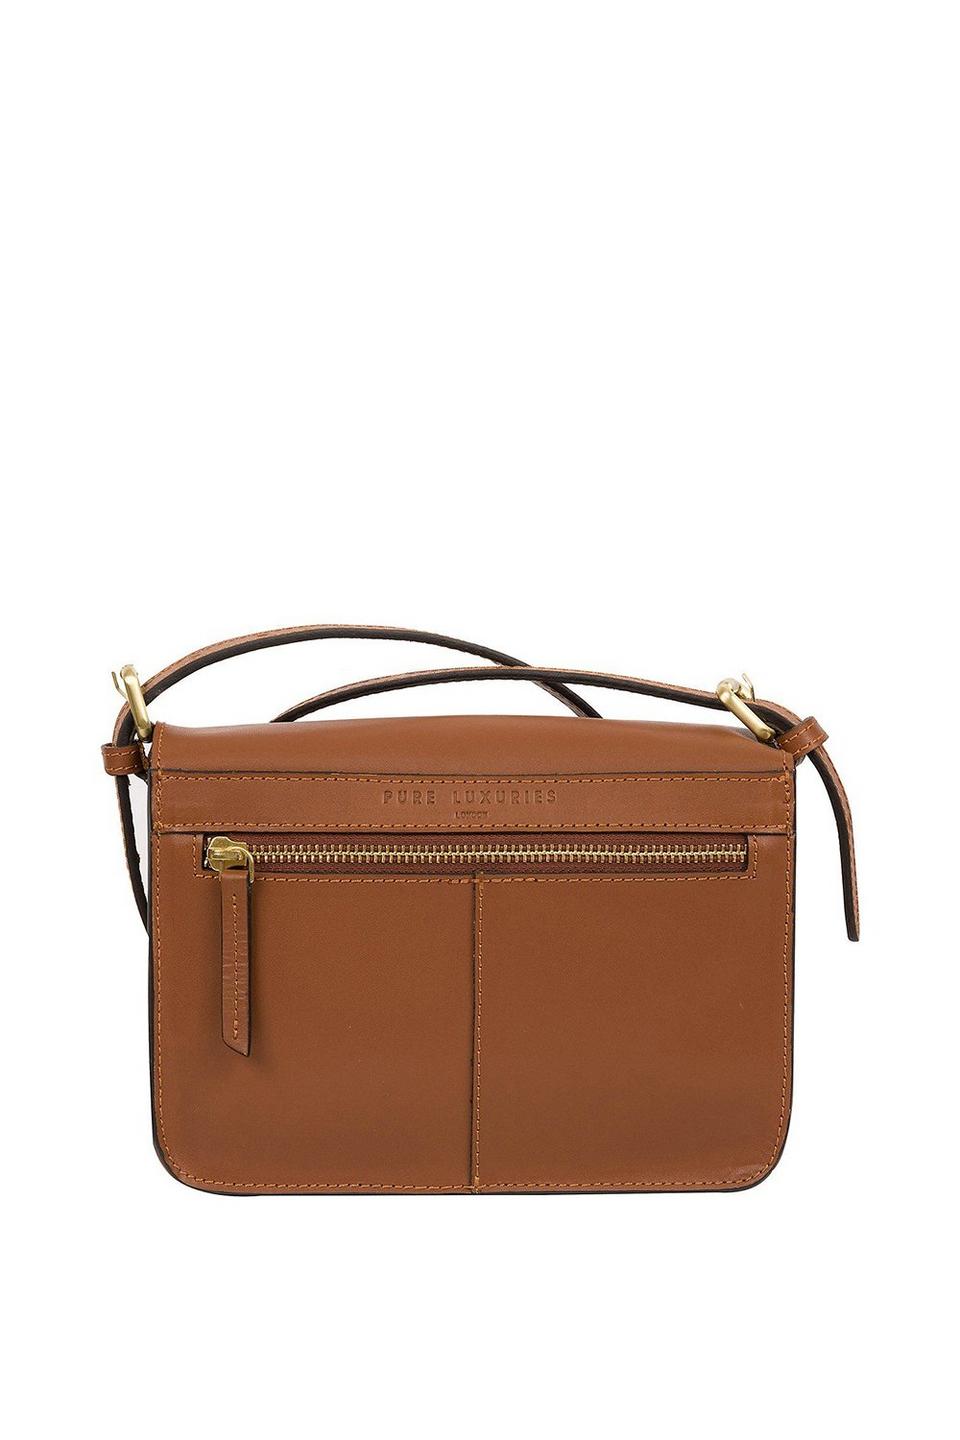 Bags & Purses | 'Langdale' Leather Cross Body Bag | Pure Luxuries London